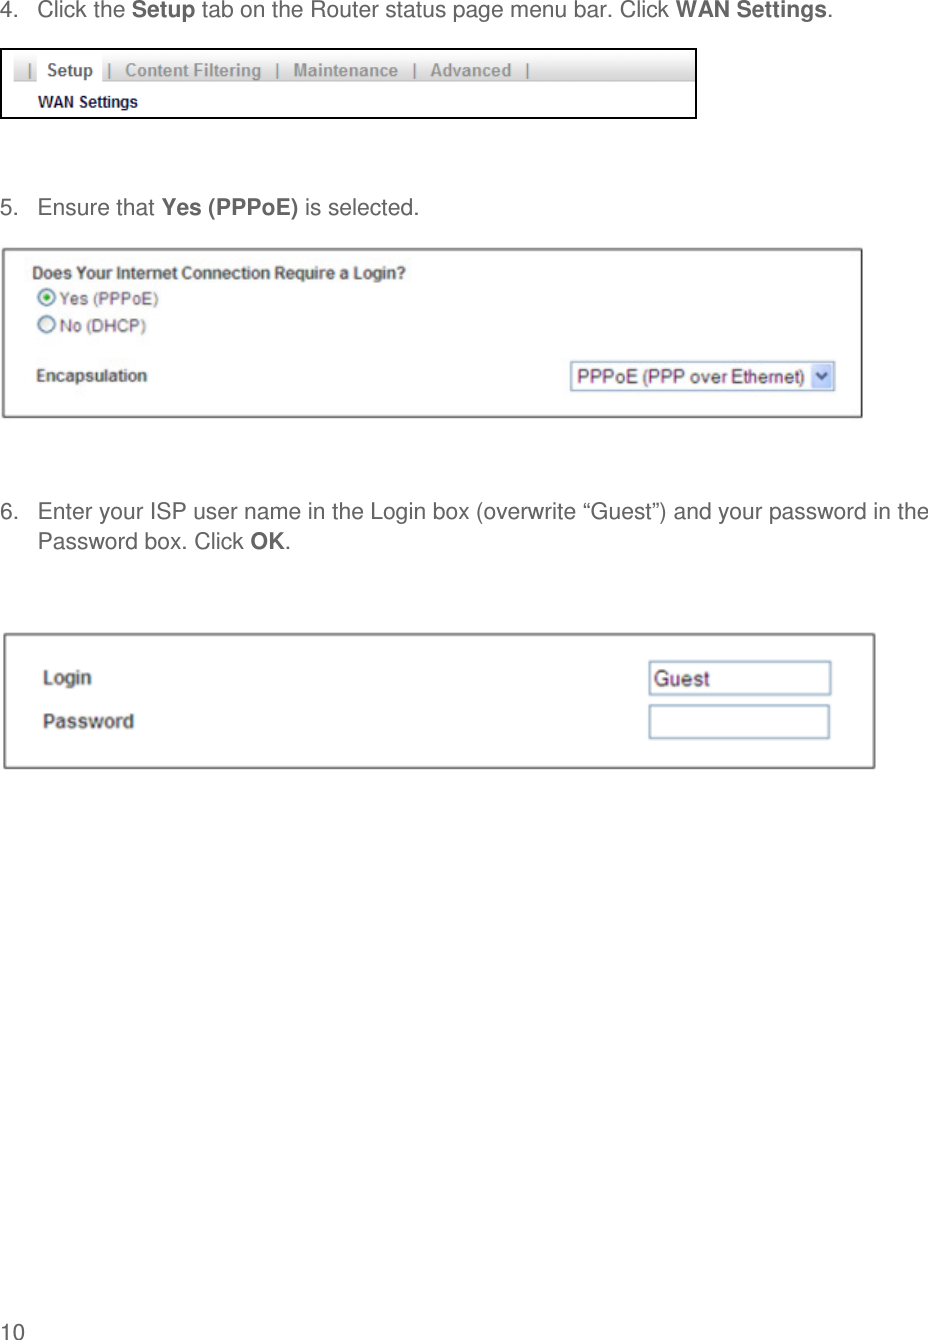  10    4.  Click the Setup tab on the Router status page menu bar. Click WAN Settings.    5.  Ensure that Yes (PPPoE) is selected.   6.  Enter your ISP user name in the Login box (overwrite “Guest”) and your password in the Password box. Click OK.     